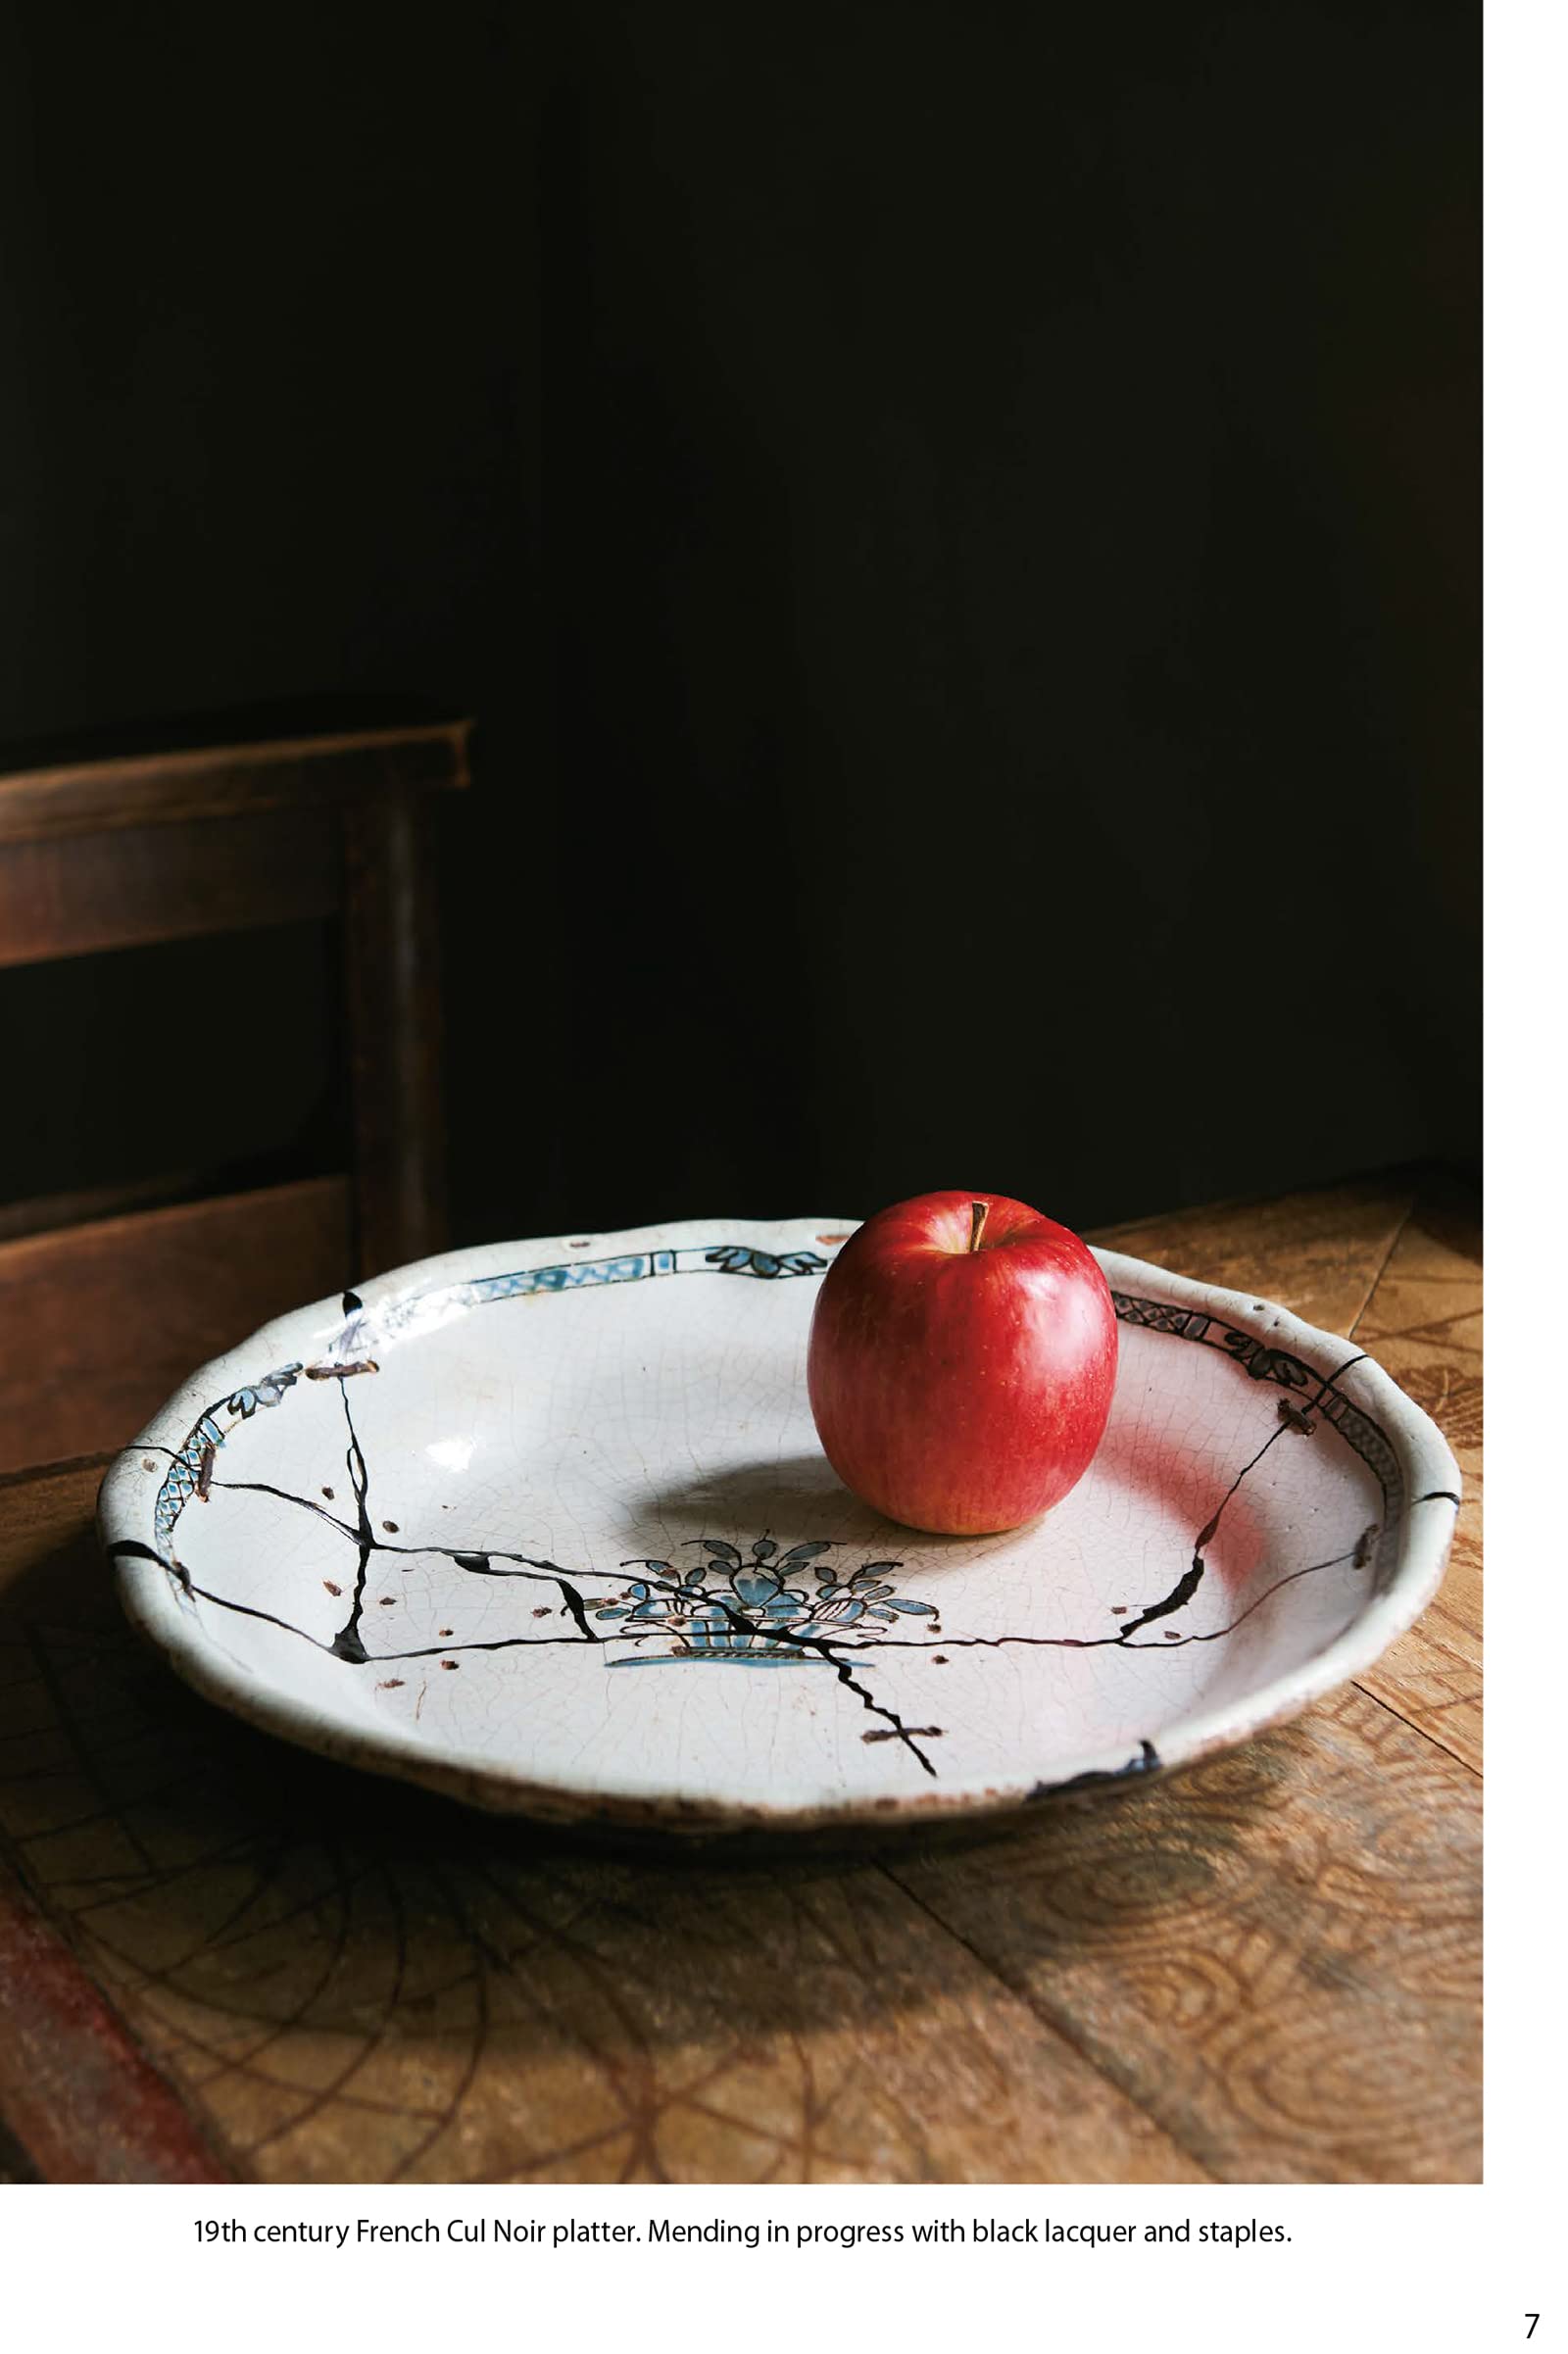 A Beginner's Guide to Kintsugi: The Japanese Art of Repairing Pottery and Glass